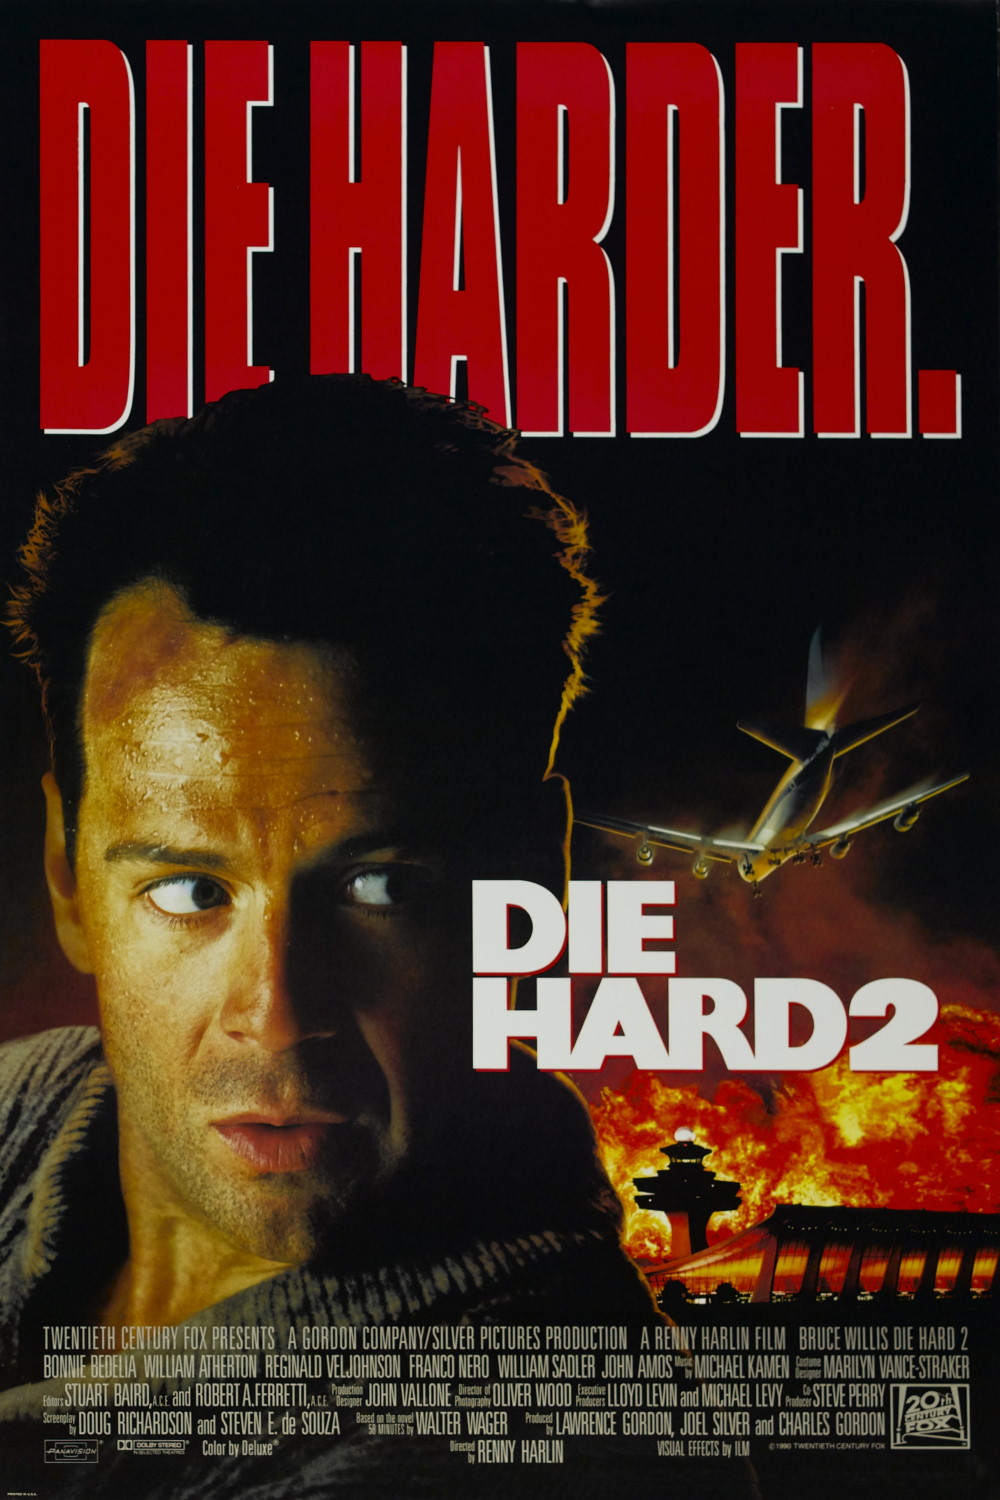 Poster for Die Hard 2 (1990)